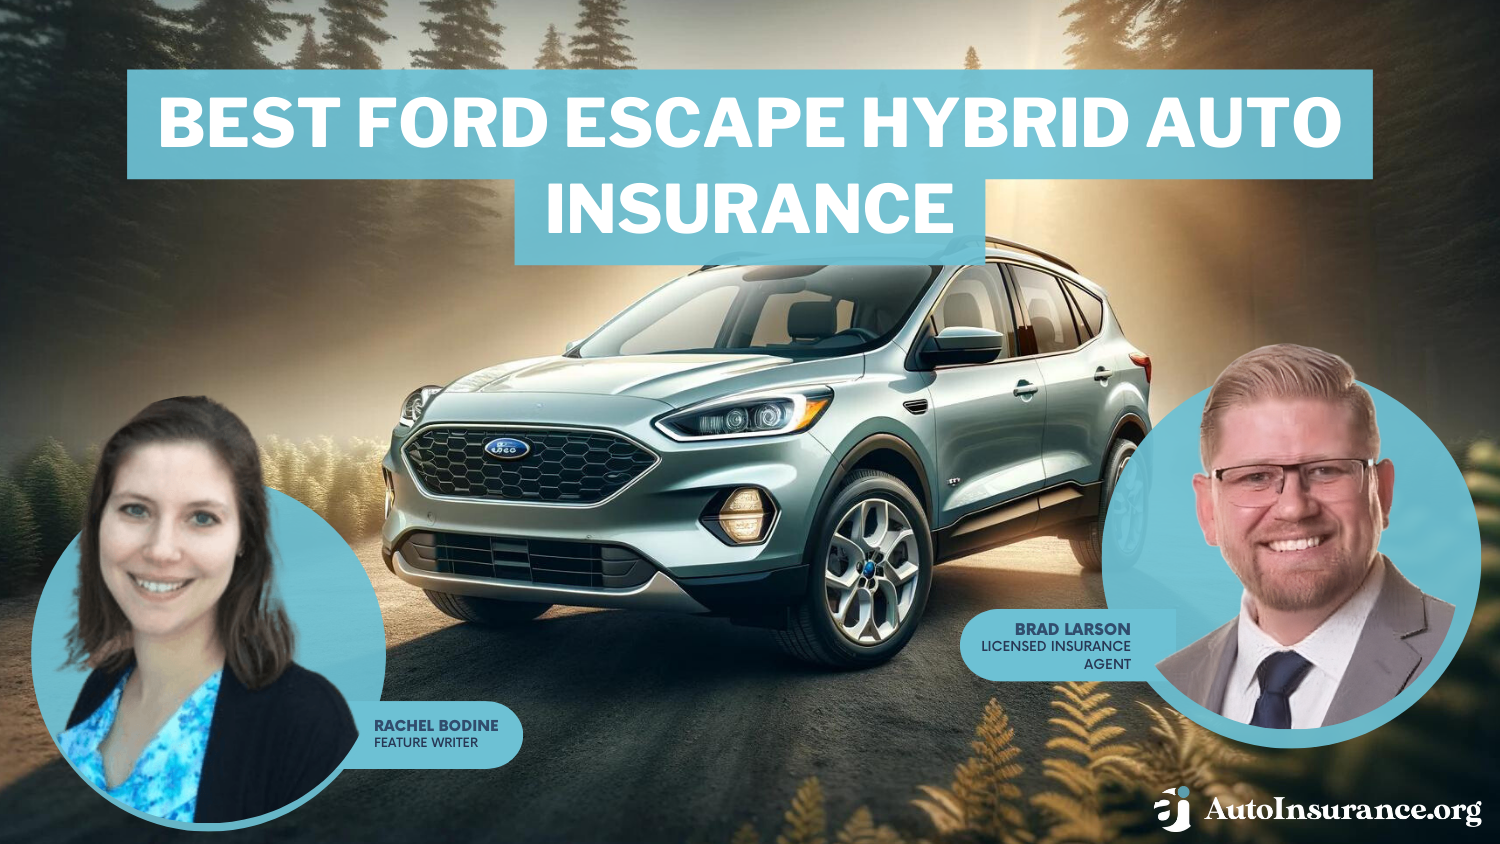 Best Ford Escape Hybrid Auto Insurance: Allstate, USAA, and Geico.